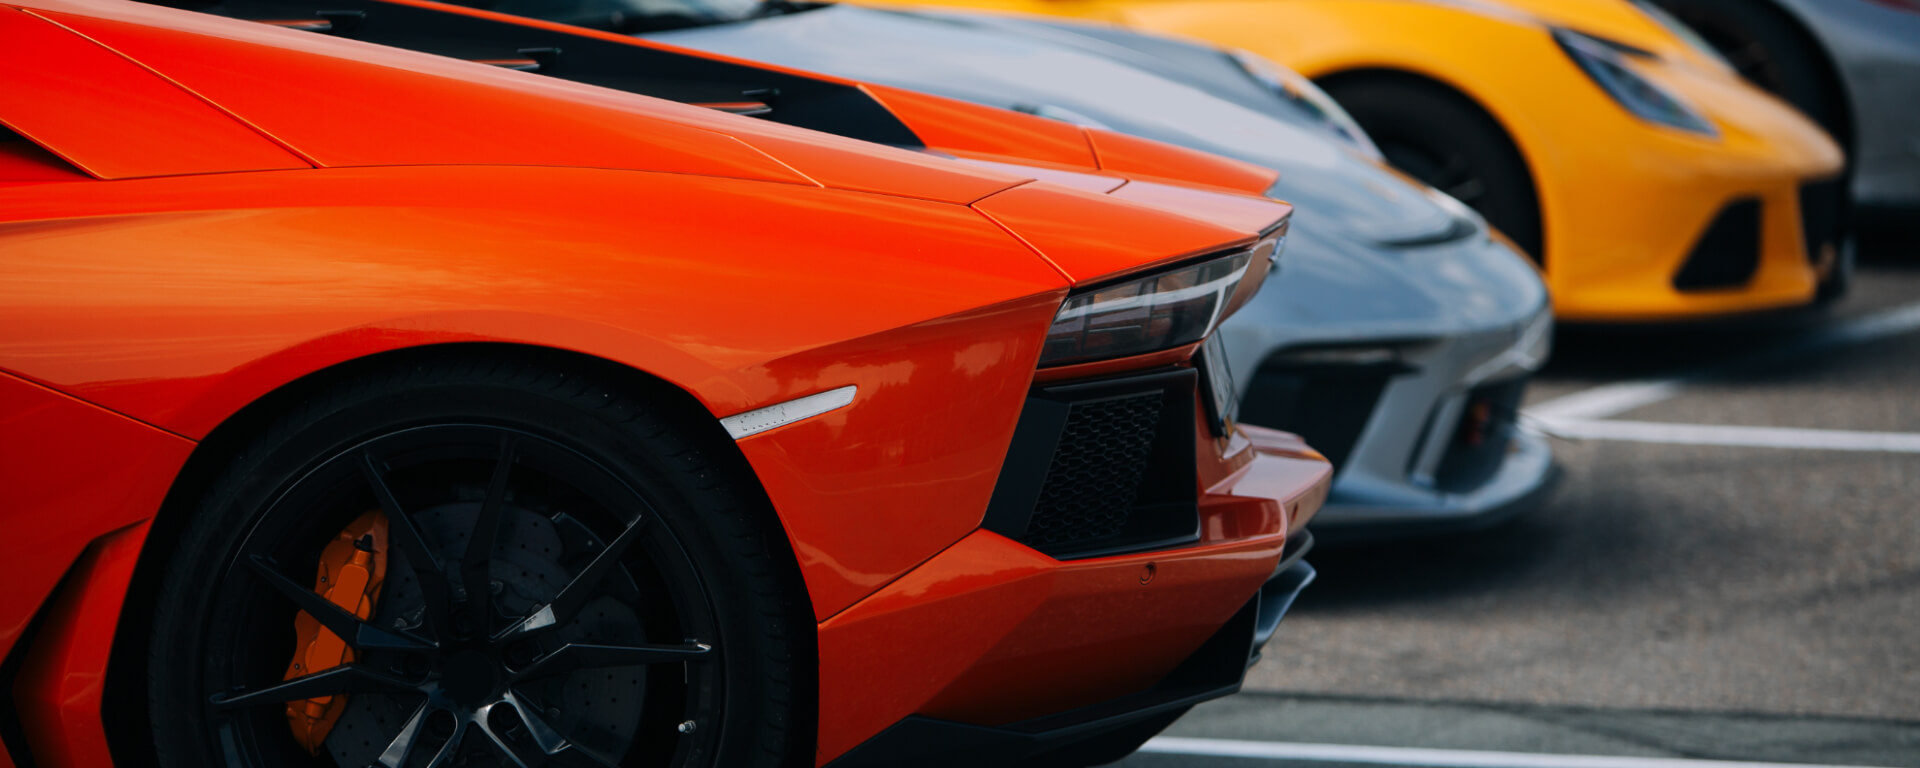 6 Most Powerful Cars on the Market Header Image